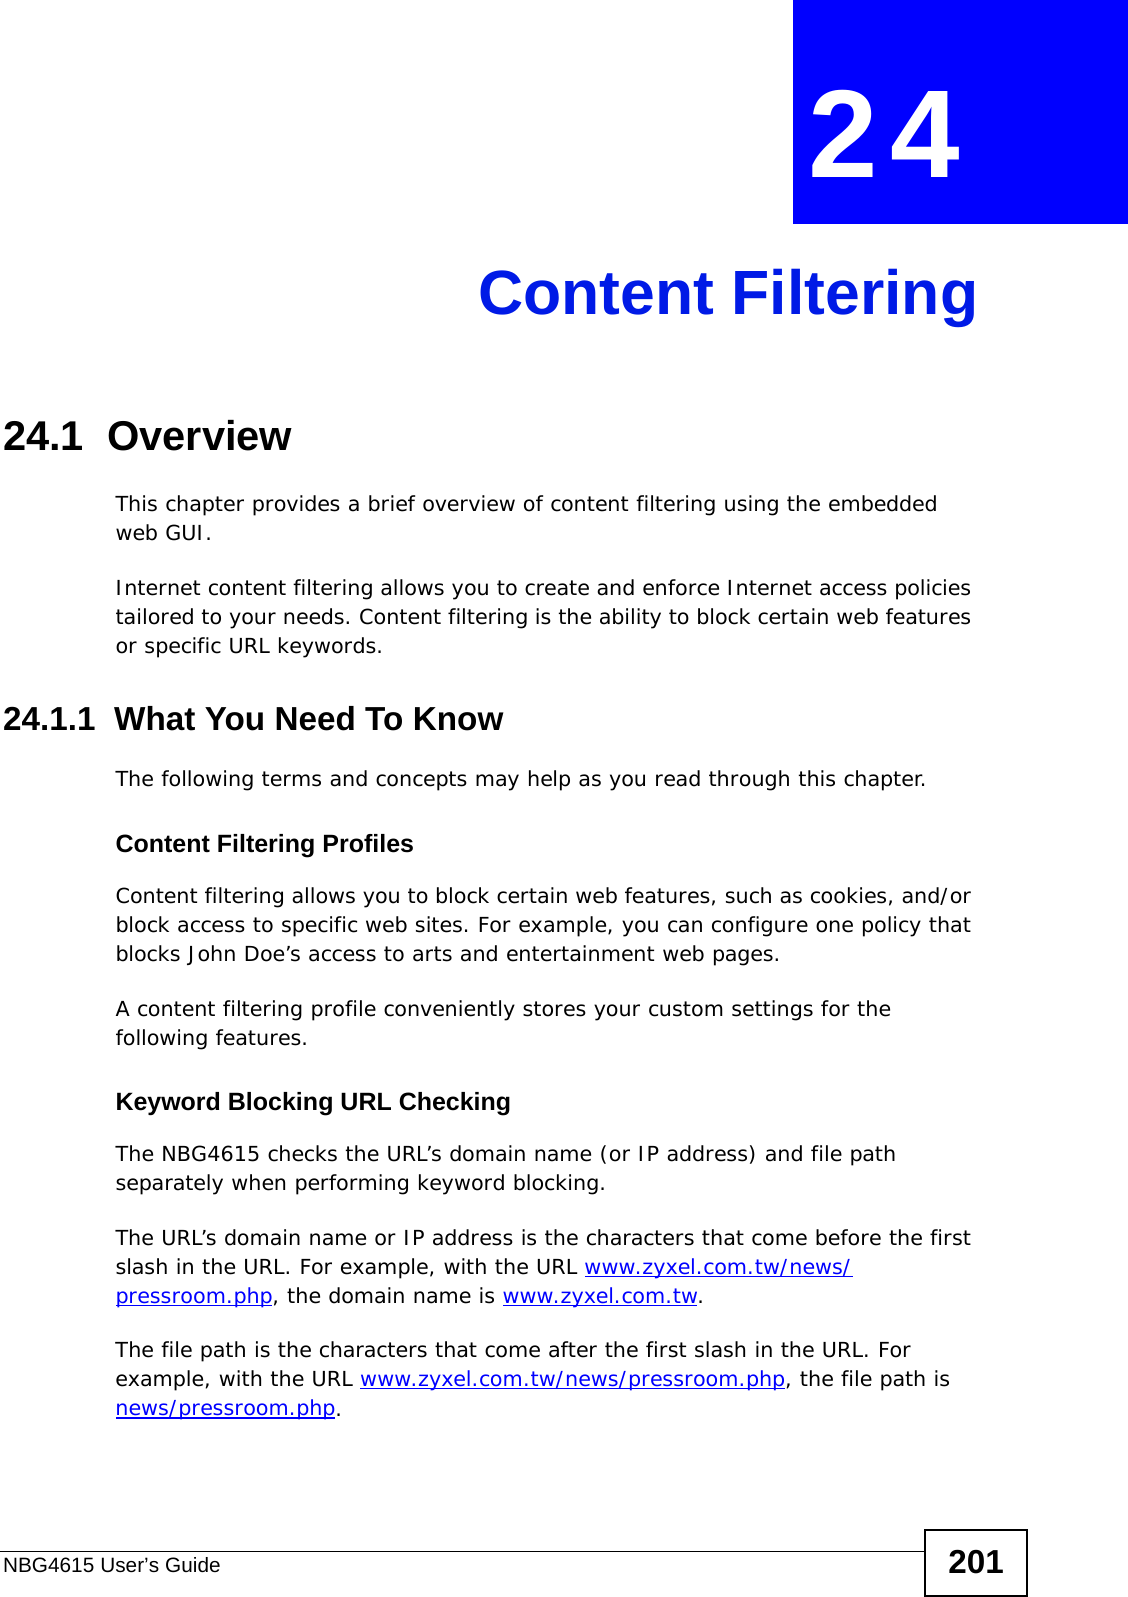 NBG4615 User’s Guide 201CHAPTER  24 Content Filtering24.1  OverviewThis chapter provides a brief overview of content filtering using the embedded web GUI.Internet content filtering allows you to create and enforce Internet access policies tailored to your needs. Content filtering is the ability to block certain web features or specific URL keywords.24.1.1  What You Need To KnowThe following terms and concepts may help as you read through this chapter.Content Filtering ProfilesContent filtering allows you to block certain web features, such as cookies, and/or block access to specific web sites. For example, you can configure one policy that blocks John Doe’s access to arts and entertainment web pages.A content filtering profile conveniently stores your custom settings for the following features.Keyword Blocking URL CheckingThe NBG4615 checks the URL’s domain name (or IP address) and file path separately when performing keyword blocking. The URL’s domain name or IP address is the characters that come before the first slash in the URL. For example, with the URL www.zyxel.com.tw/news/pressroom.php, the domain name is www.zyxel.com.tw.The file path is the characters that come after the first slash in the URL. For example, with the URL www.zyxel.com.tw/news/pressroom.php, the file path is news/pressroom.php.